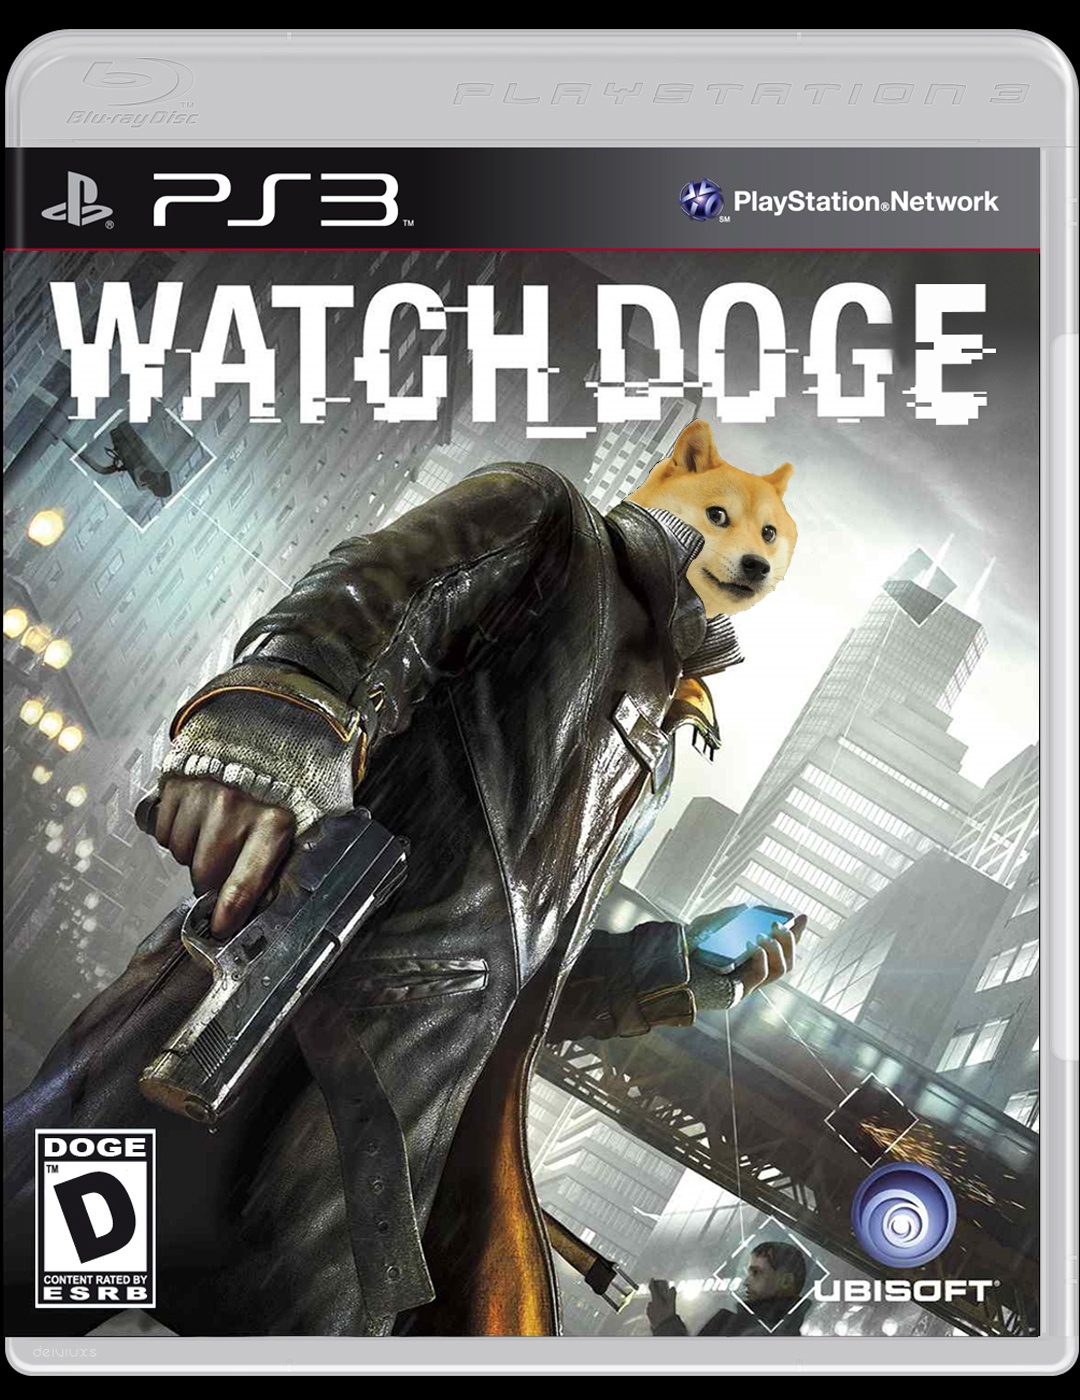 Watch Dogs Doge Edition box cover